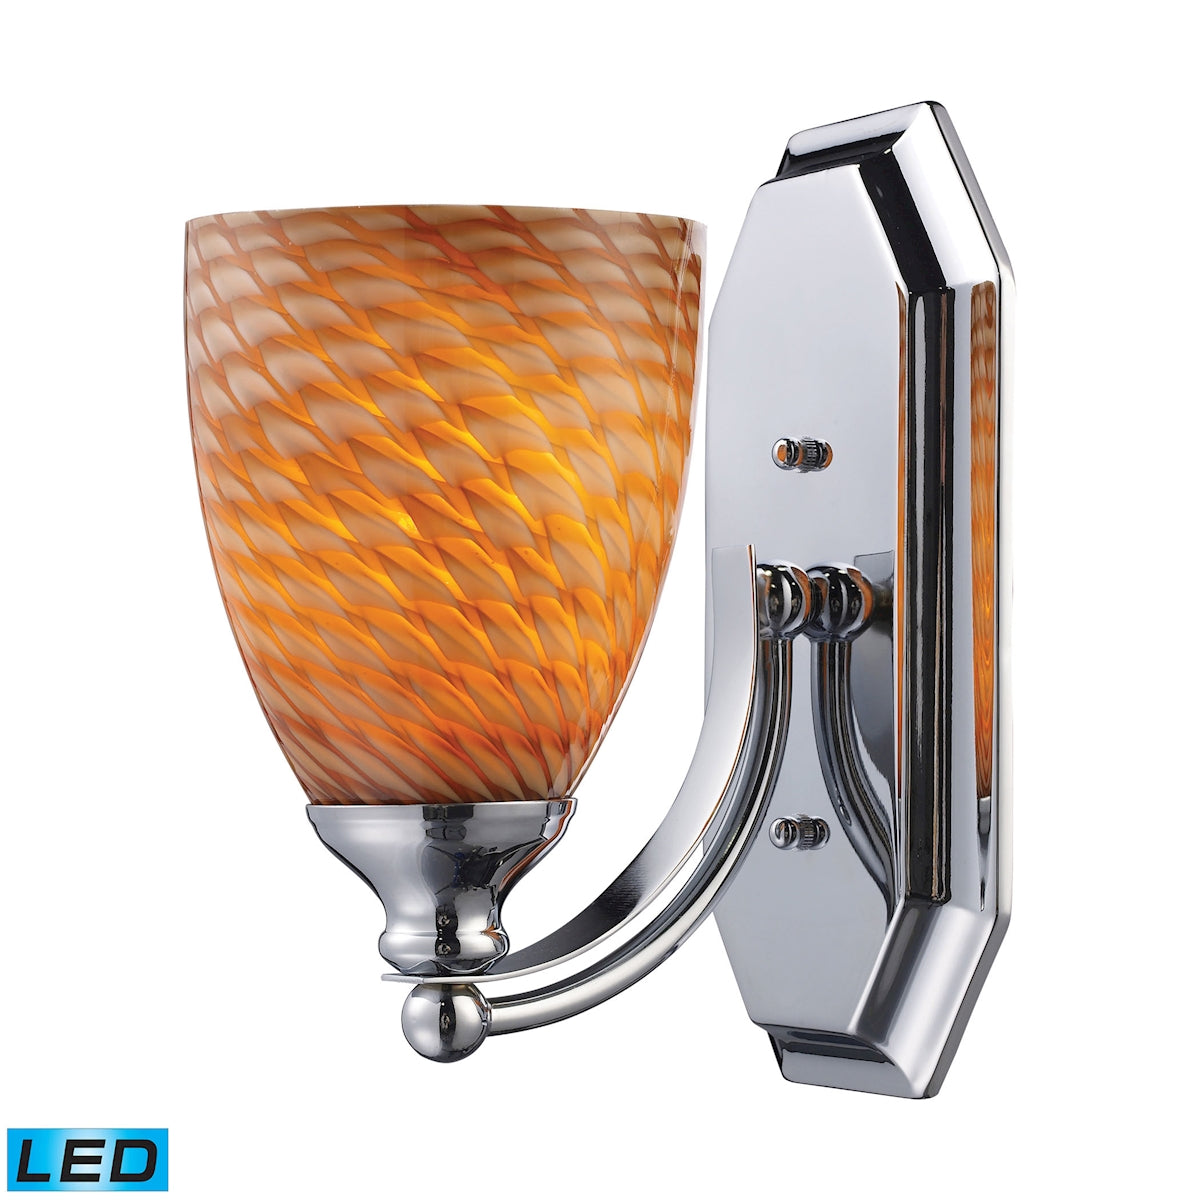 ELK Lighting 570-1C-C-LED Mix and Match Vanity 1-Light Wall Lamp in Chrome with Cocoa Glass - Includes LED Bulb